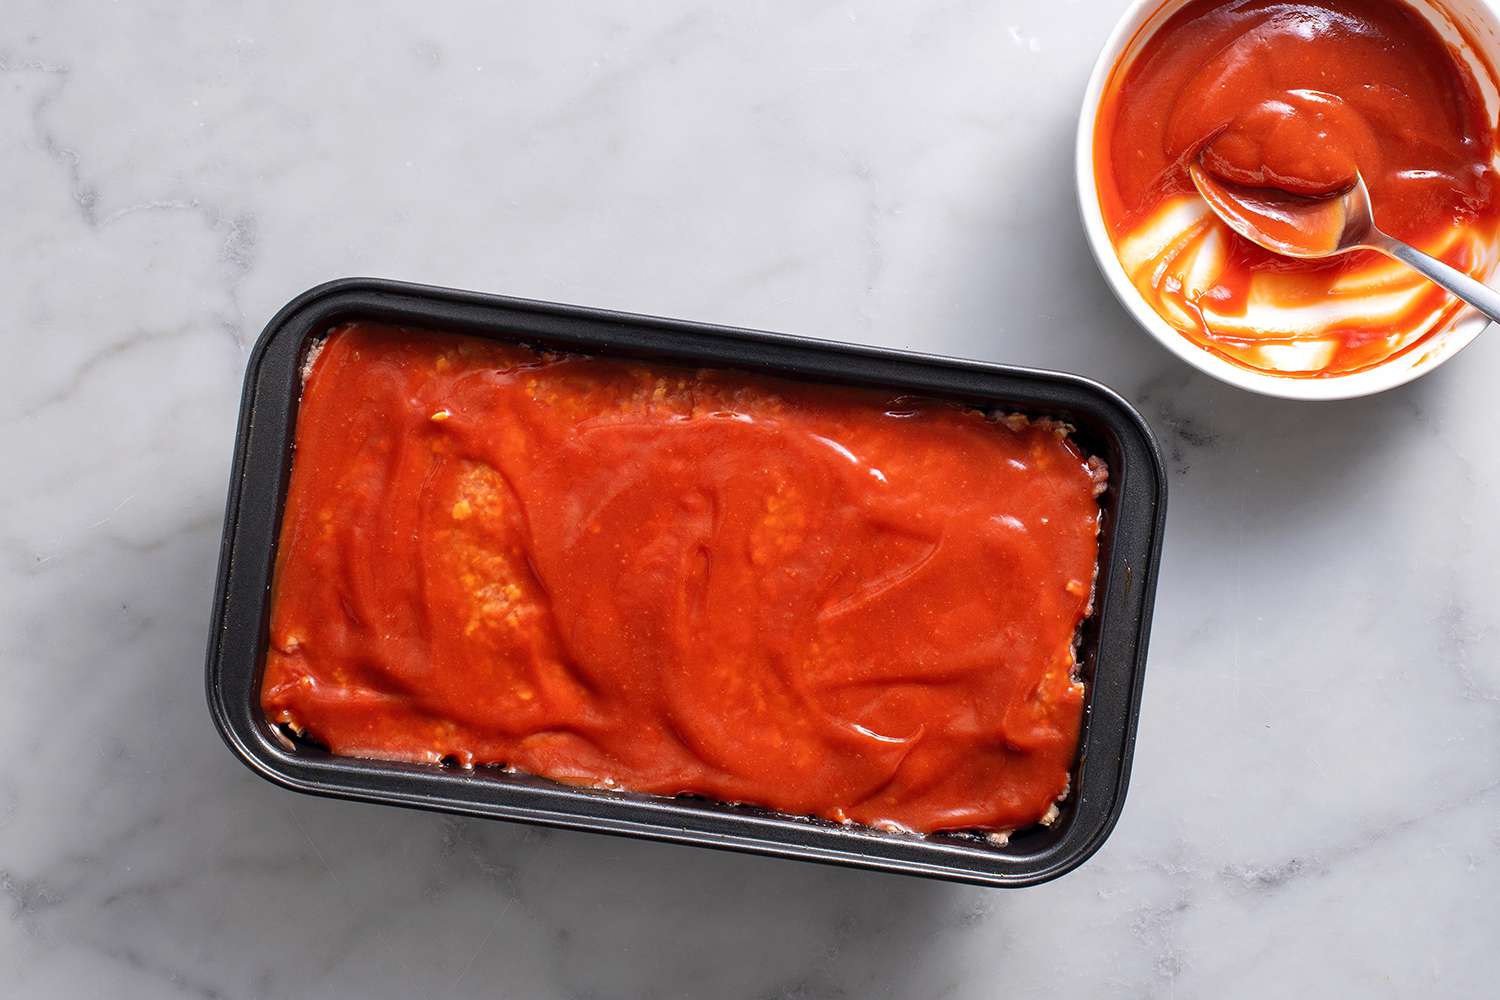 Half of the ketchup glaze evenly spread on raw meatloaf in loaf pan